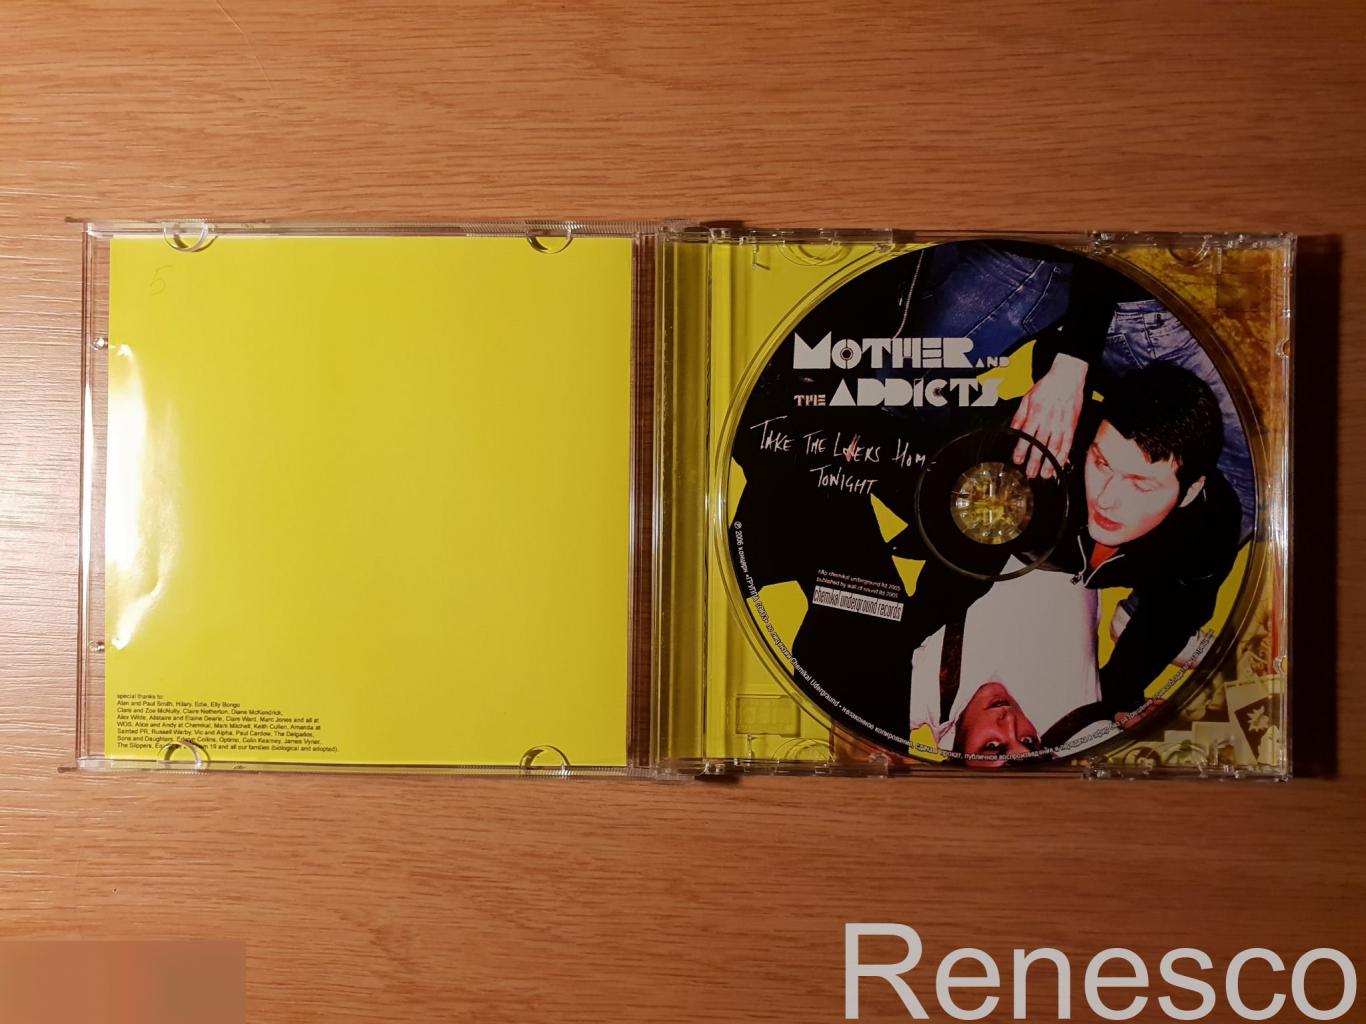 (CD) Mother And The Addicts ?– Take The Lovers Home Tonight (UK) (2005) 2